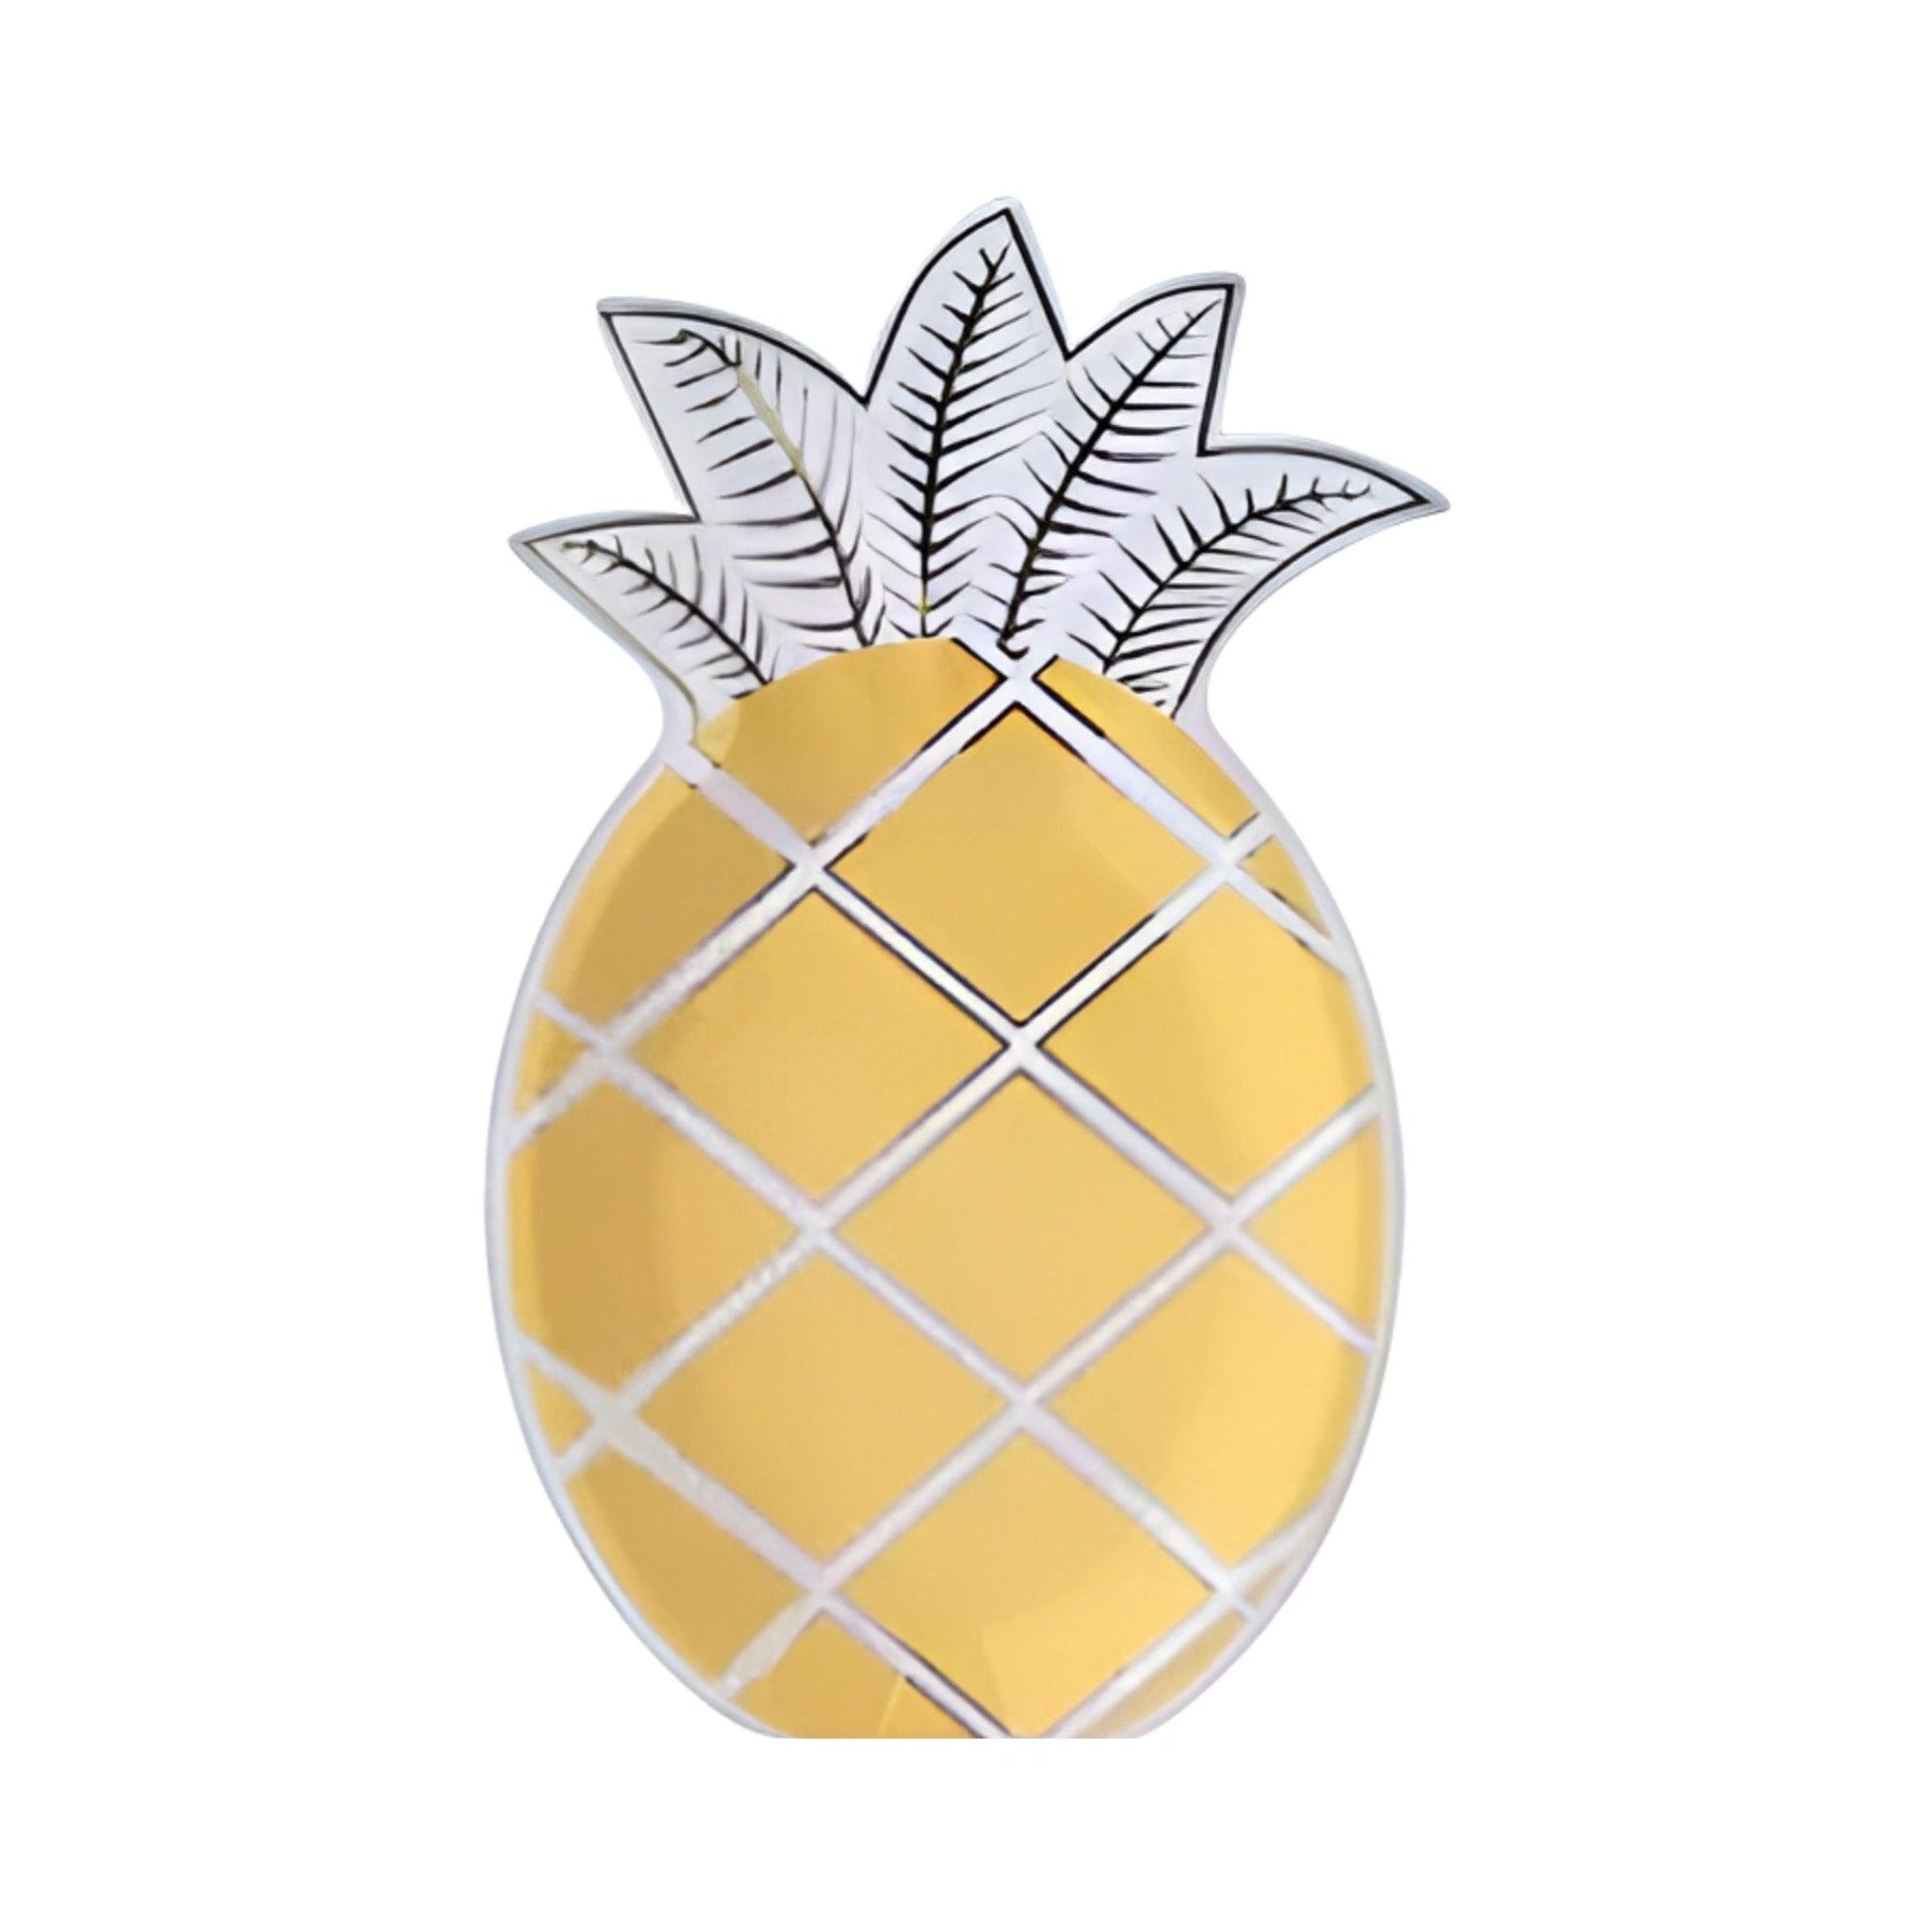 Pineapple Paper Party Plates In Yellow With Silver Foil Detail. 8 Pack.